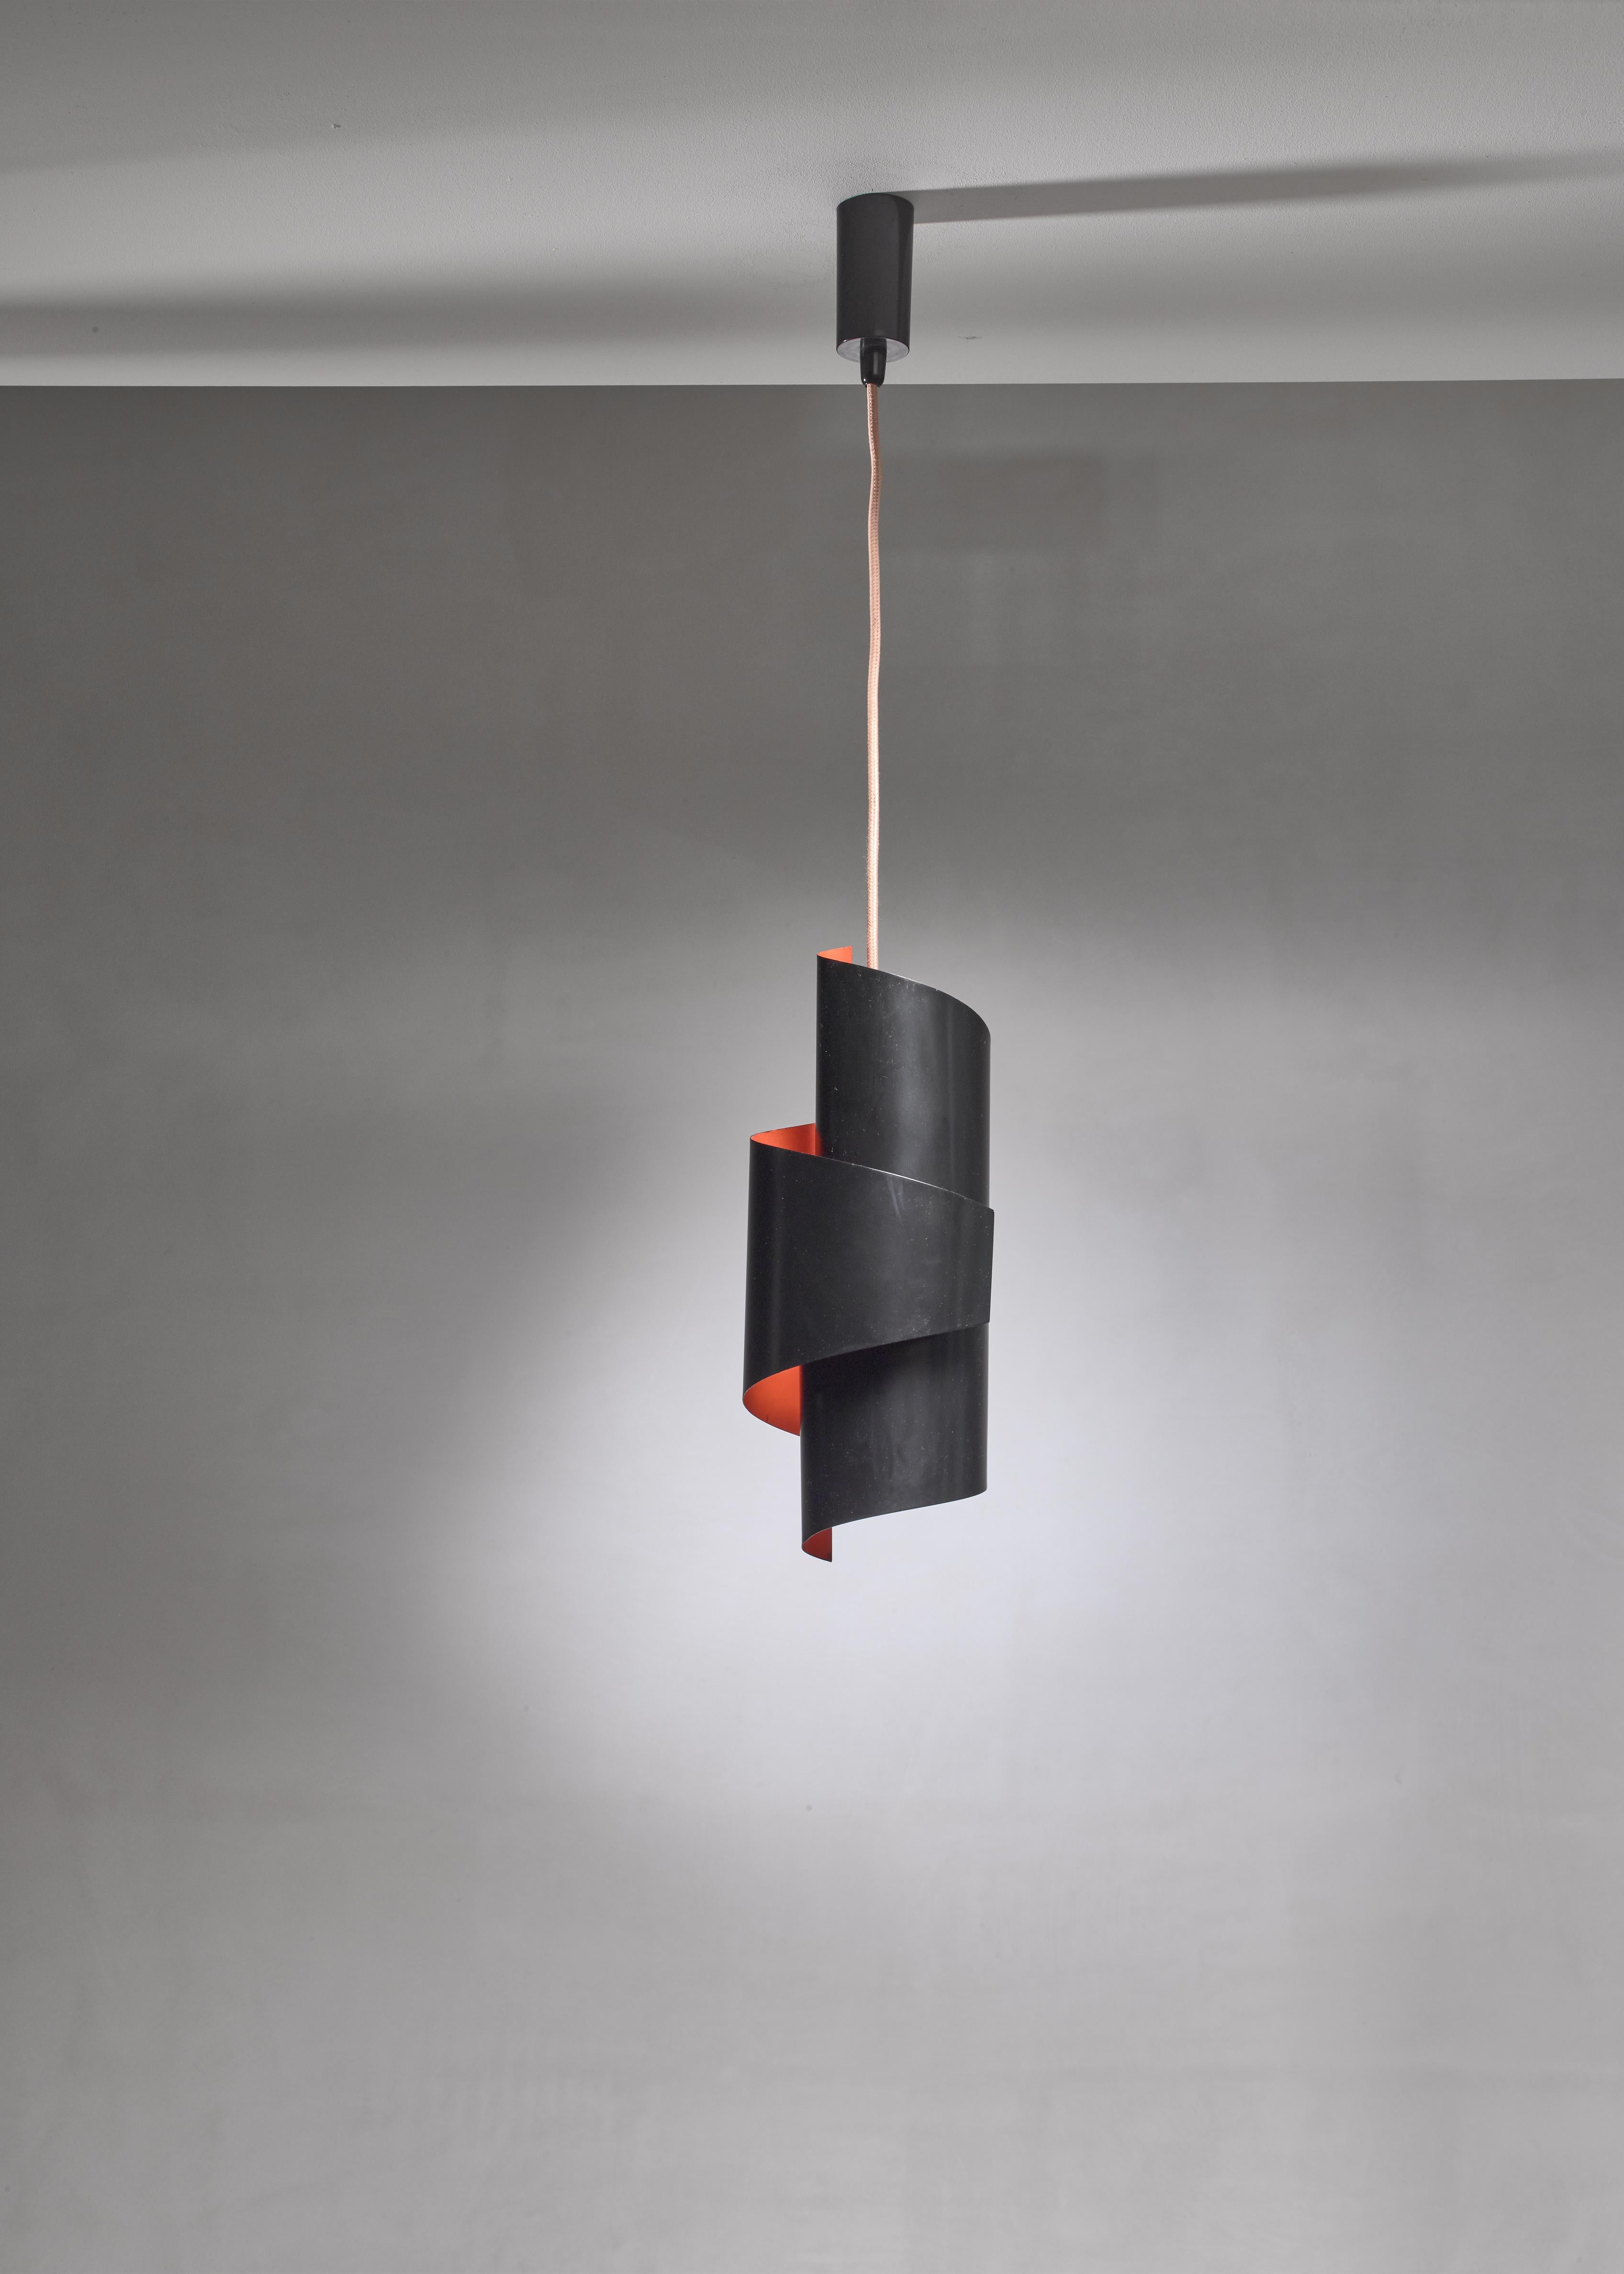 A swirl shaped pendant lamp from the 1960s by Simon Henningsen, made of bent sheet metal, painted black on the outside and orange on the inside, giving it a beautiful warm light.

The total drop can be adjusted to your requirements. We also have a